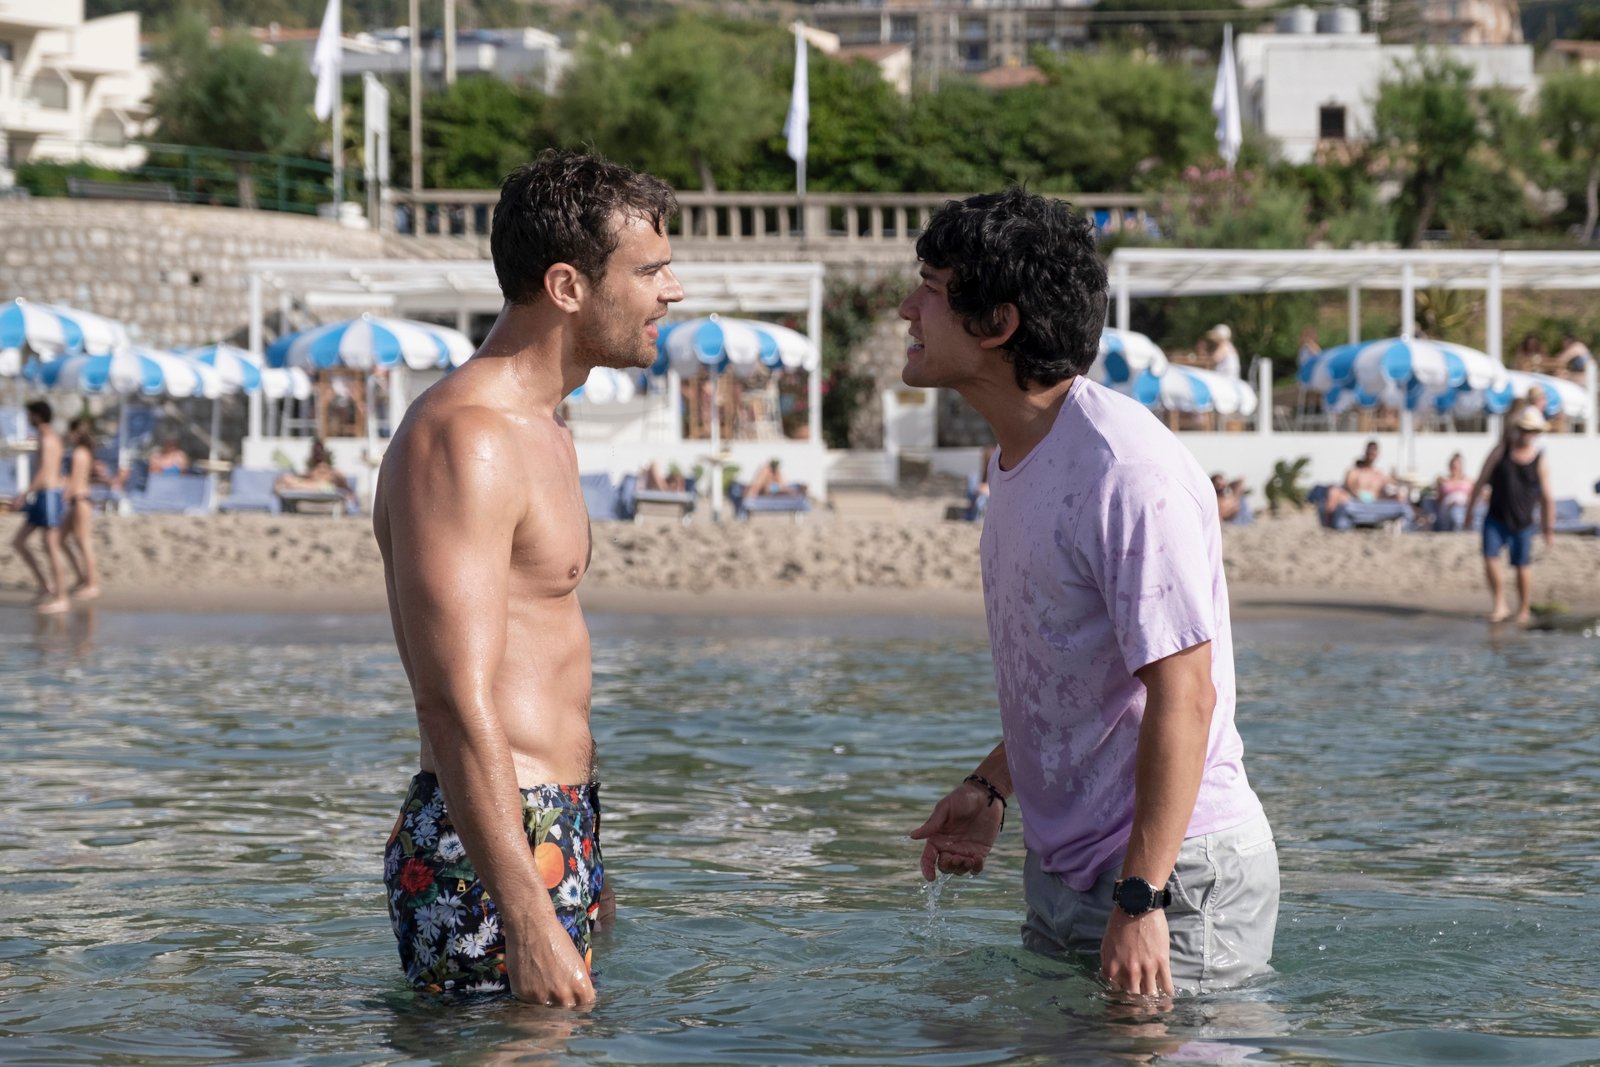 Theo James and Will Sharpe in 'The White Lotus' Season 2 Episode 7, 'Arrivederci.' They're standing in the ocean and yelling at each other.